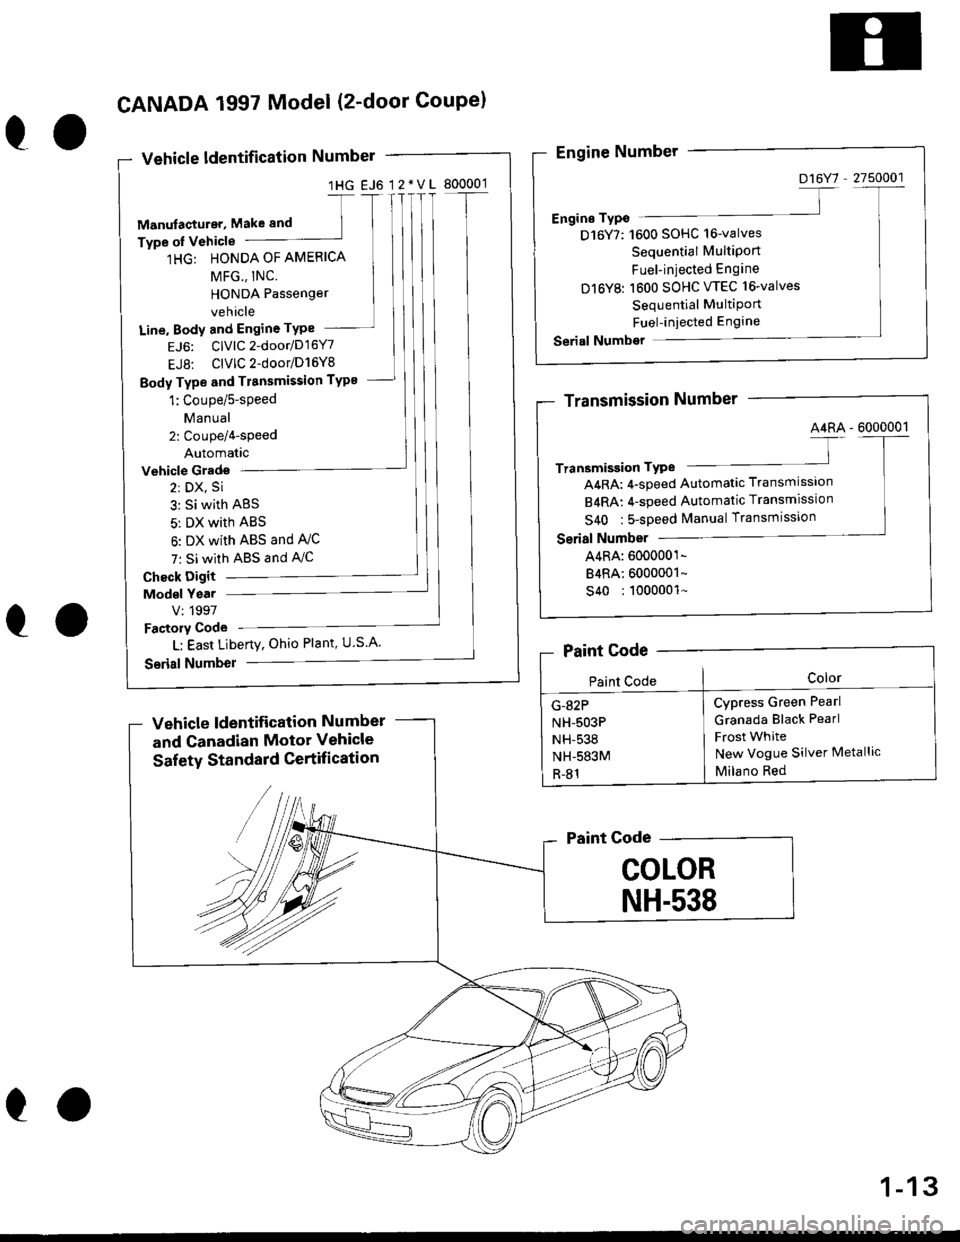 HONDA CIVIC 2000 6.G User Guide 1HG EJ6 12*VL 800001
1HG: HONDA OF AMERICA
Line, Body and Engine TYPe
EJ6: ClvlC2-door/D16Y7
EJ8: ClVlC2-door/D16Y8
Body Type and Tr8nsmission TYP8
Vehicle Grado
2: DX, Si
3: Si with ABS
5: DX with AB